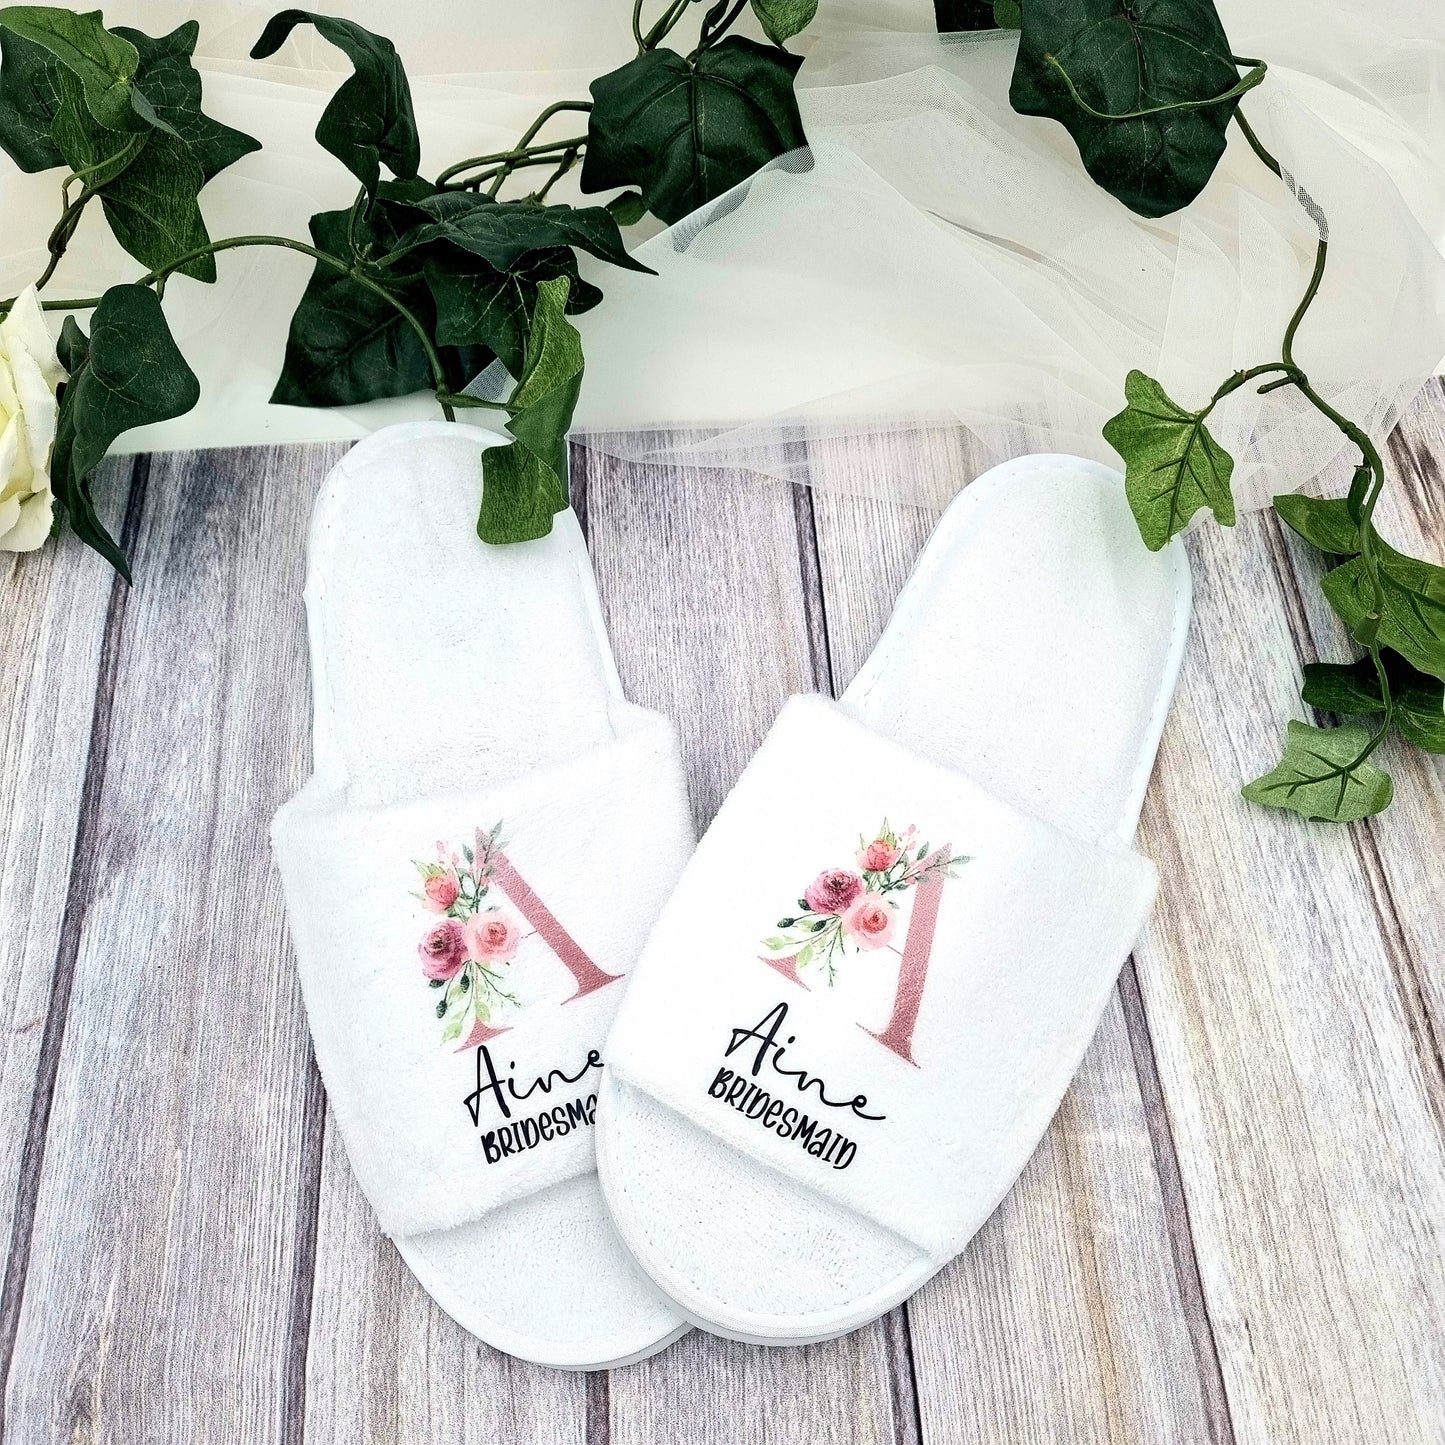 HanaLee's white bridal slippers with pink initial design and personalised with name and title